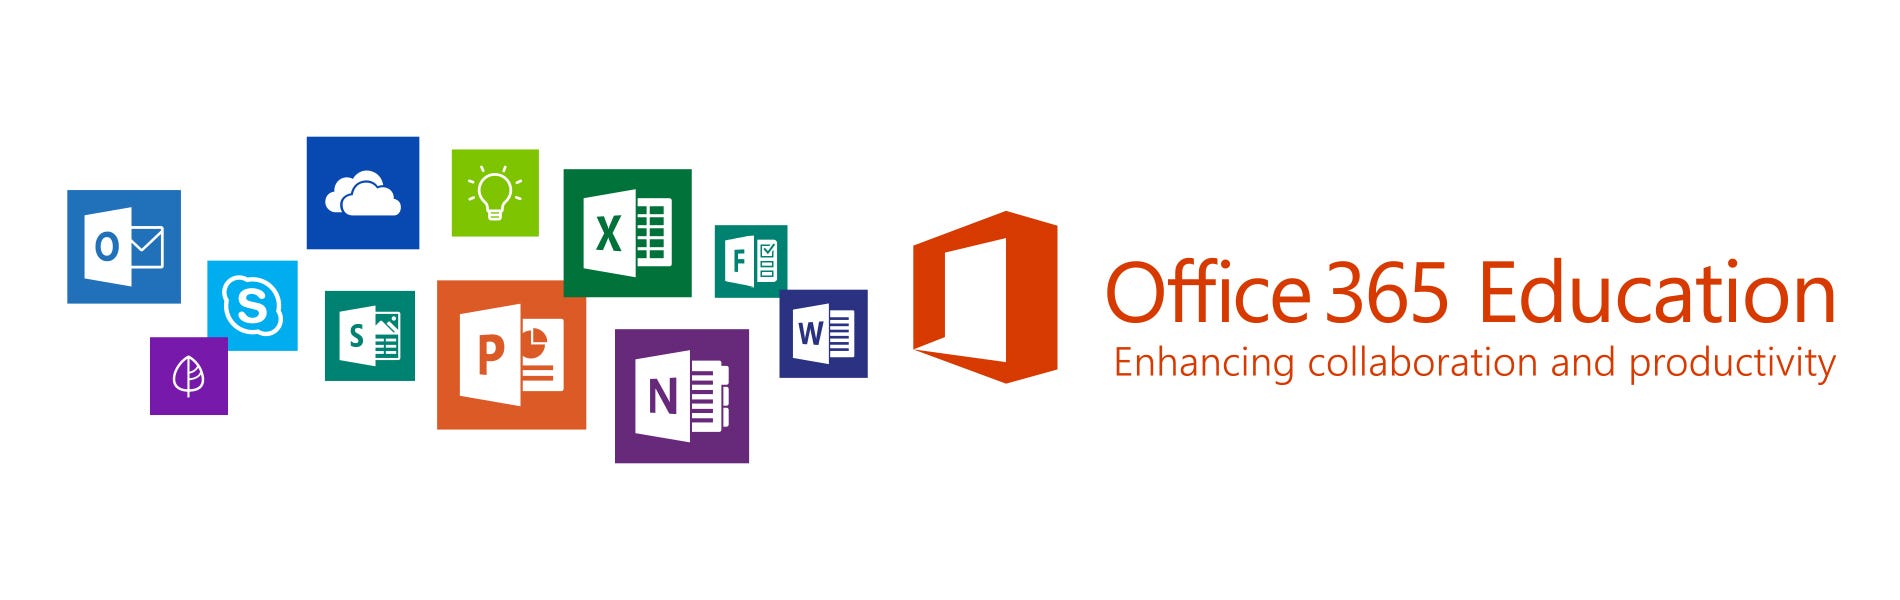 How To Get Microsoft Office 365 For Your School For Free Part 2 Of 3